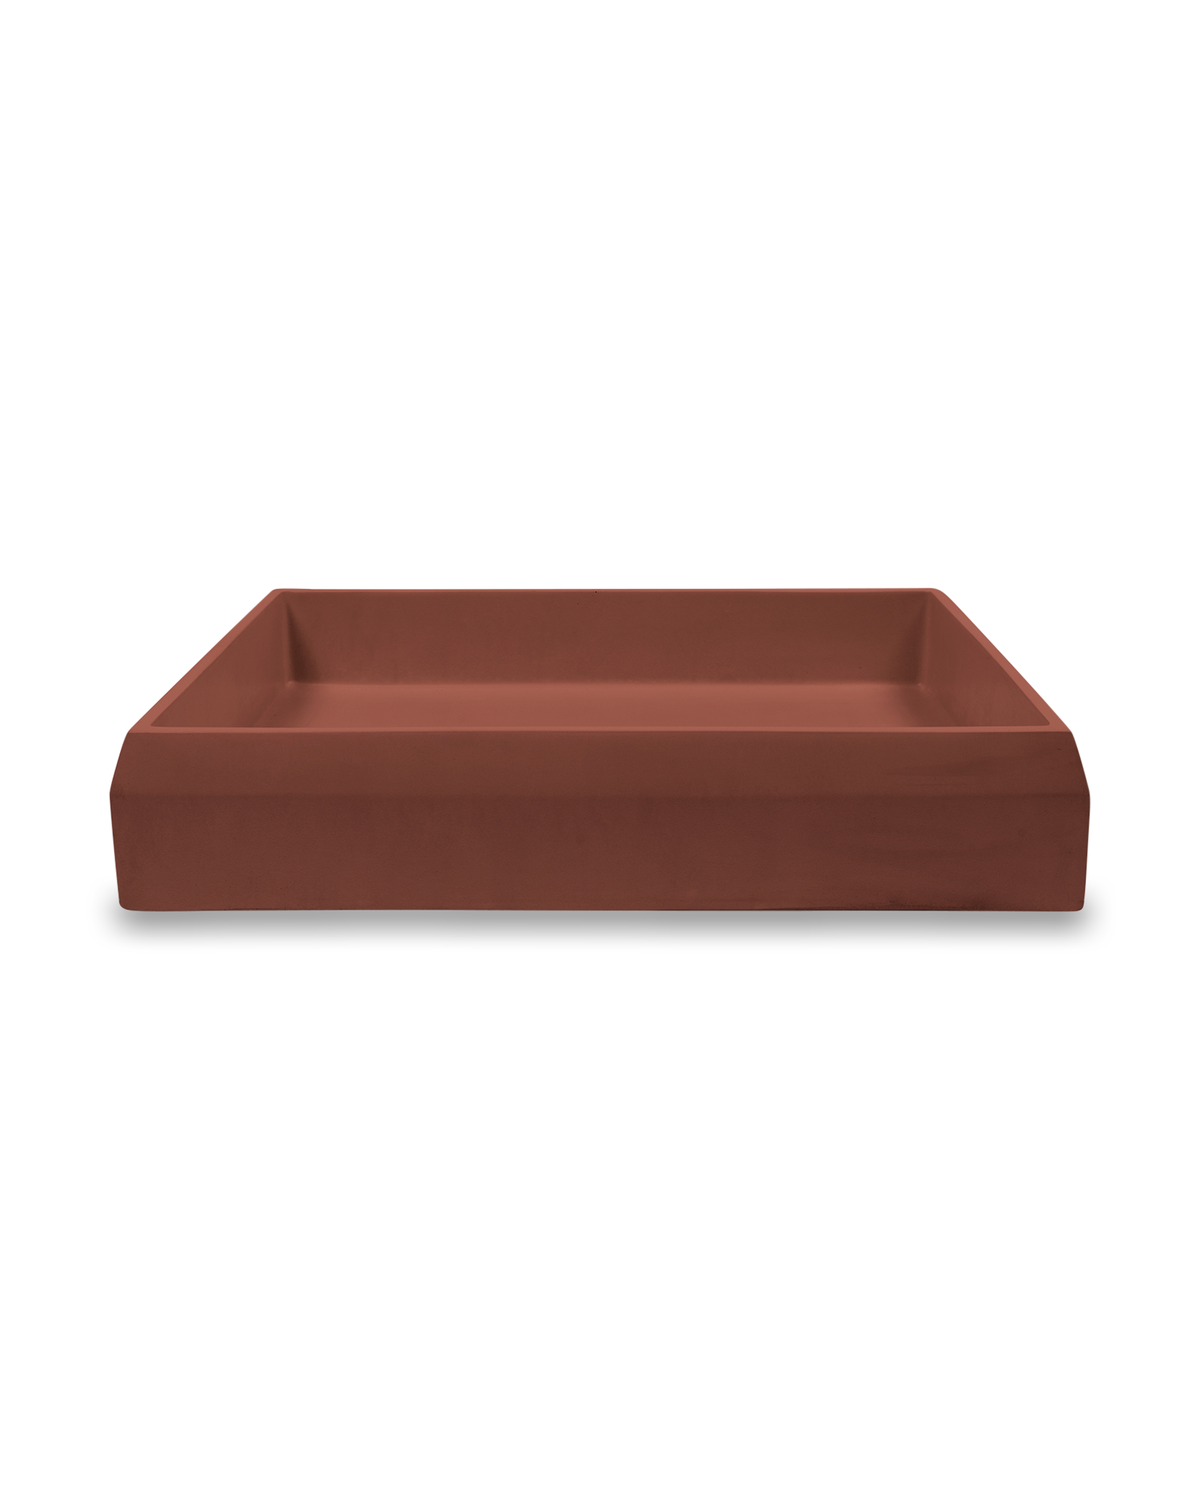 Prism Rectangle Basin - Surface Mount (Clay)